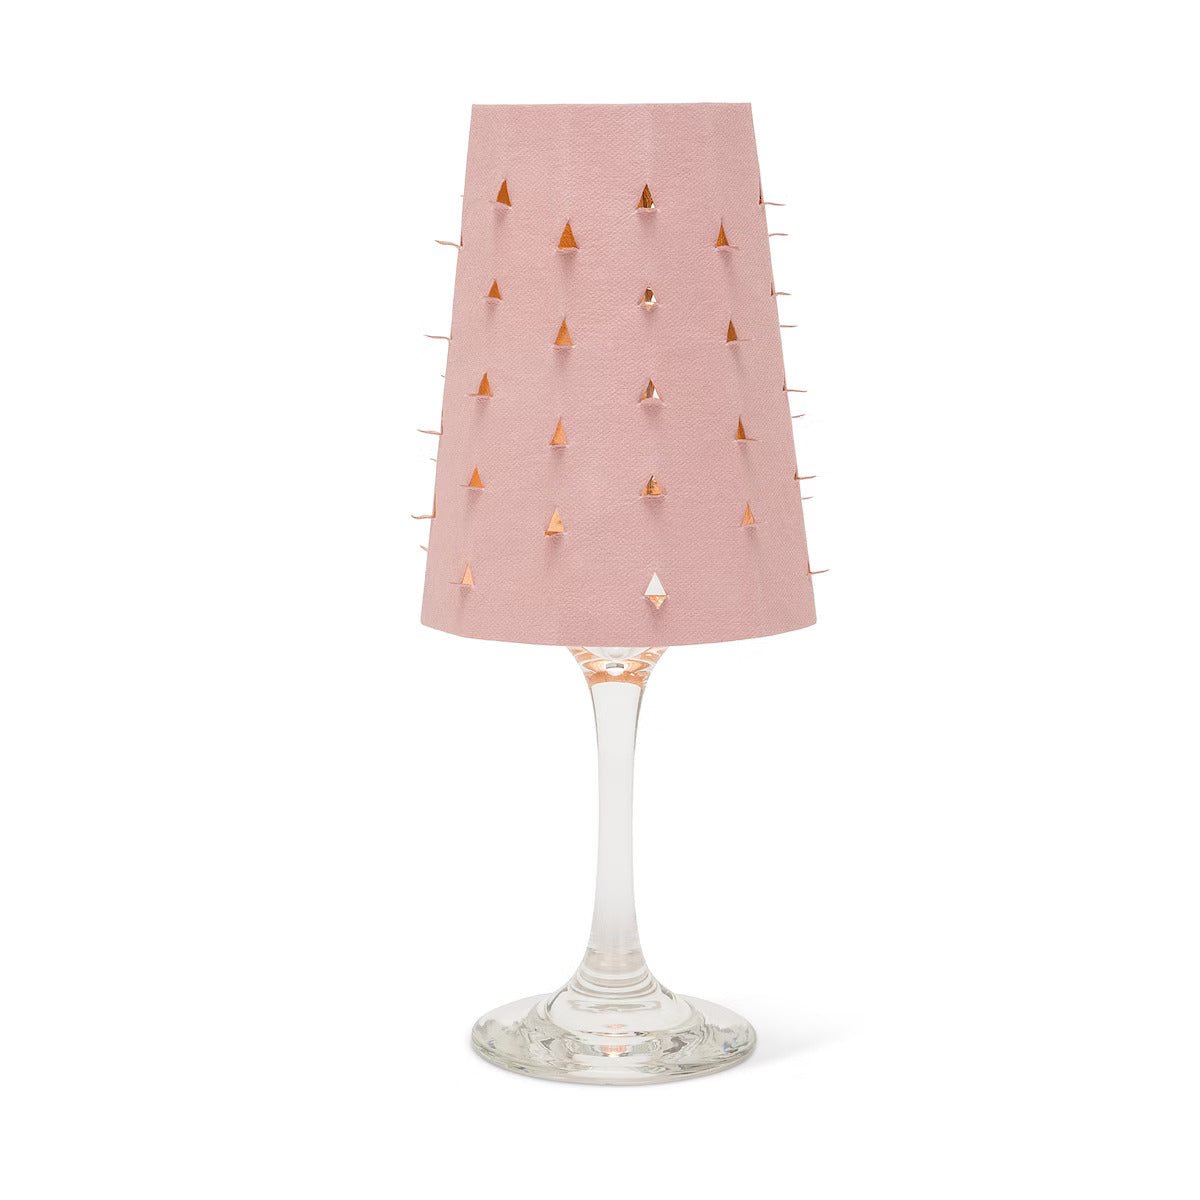 A pink washable paper lampshade with cut out details is shown sitting atop a wine glass.